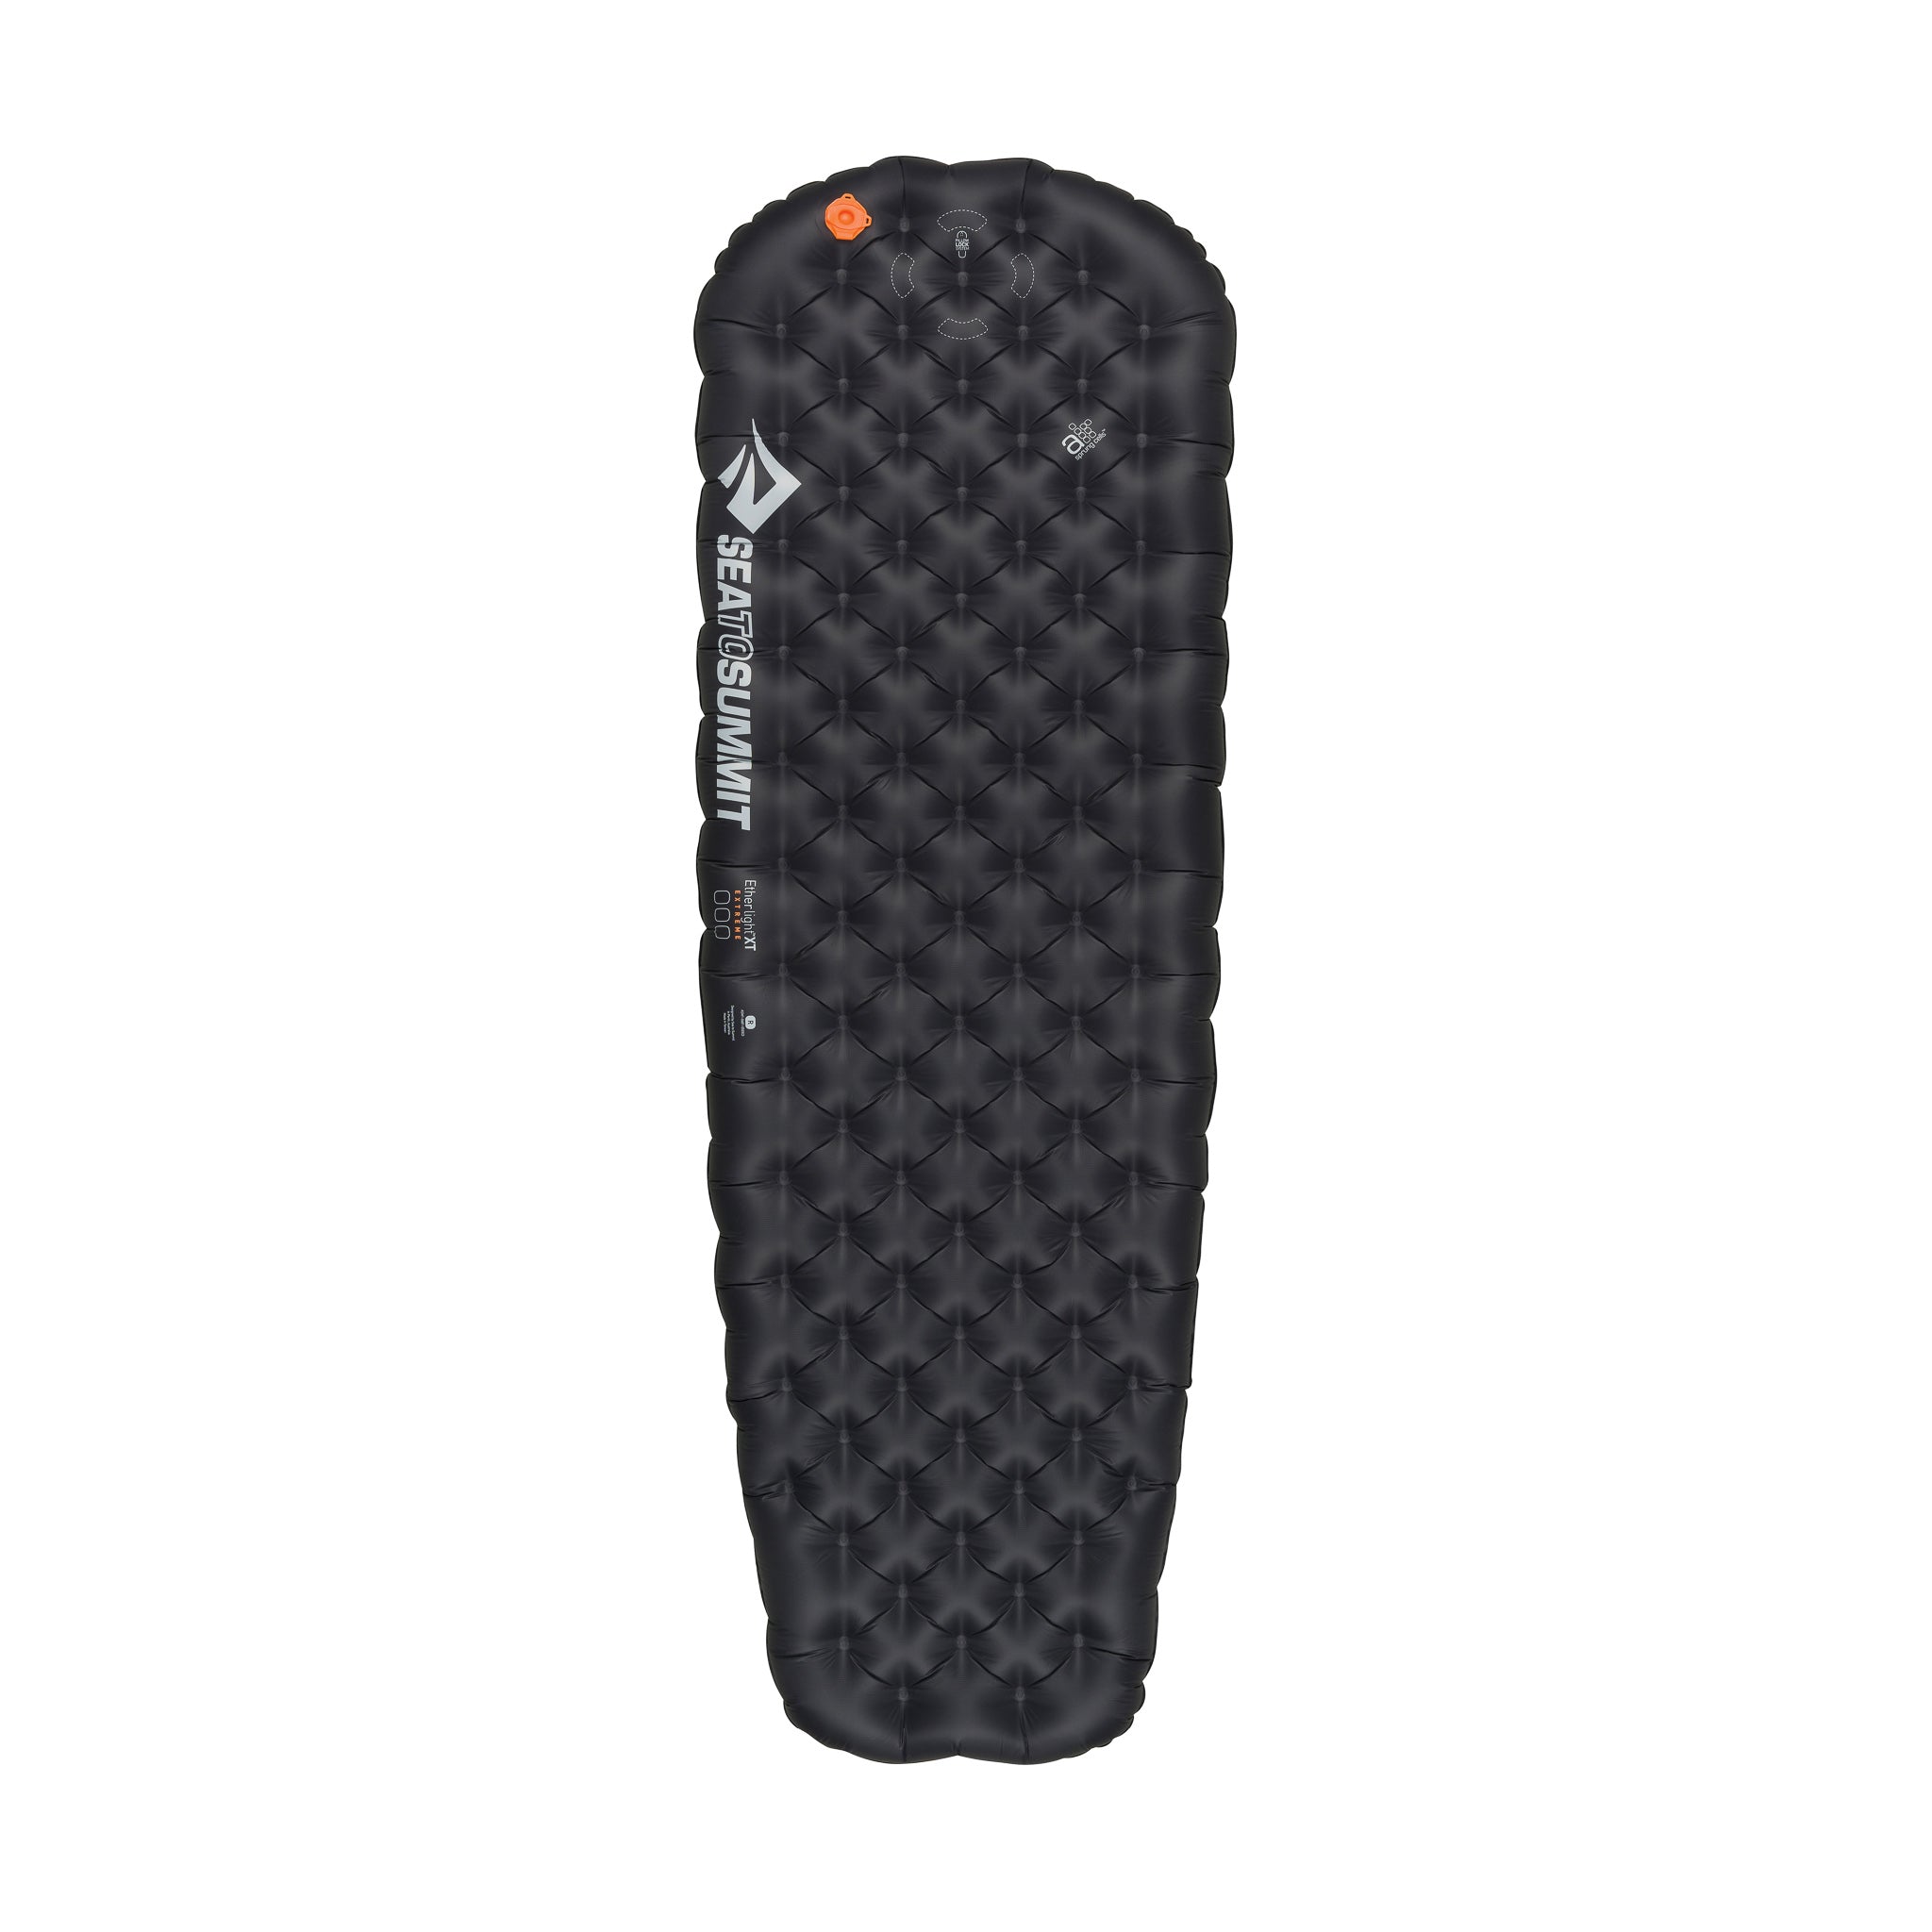 Ether Light XT Extreme Insulated Air Sleeping Pad | Sea to Summit